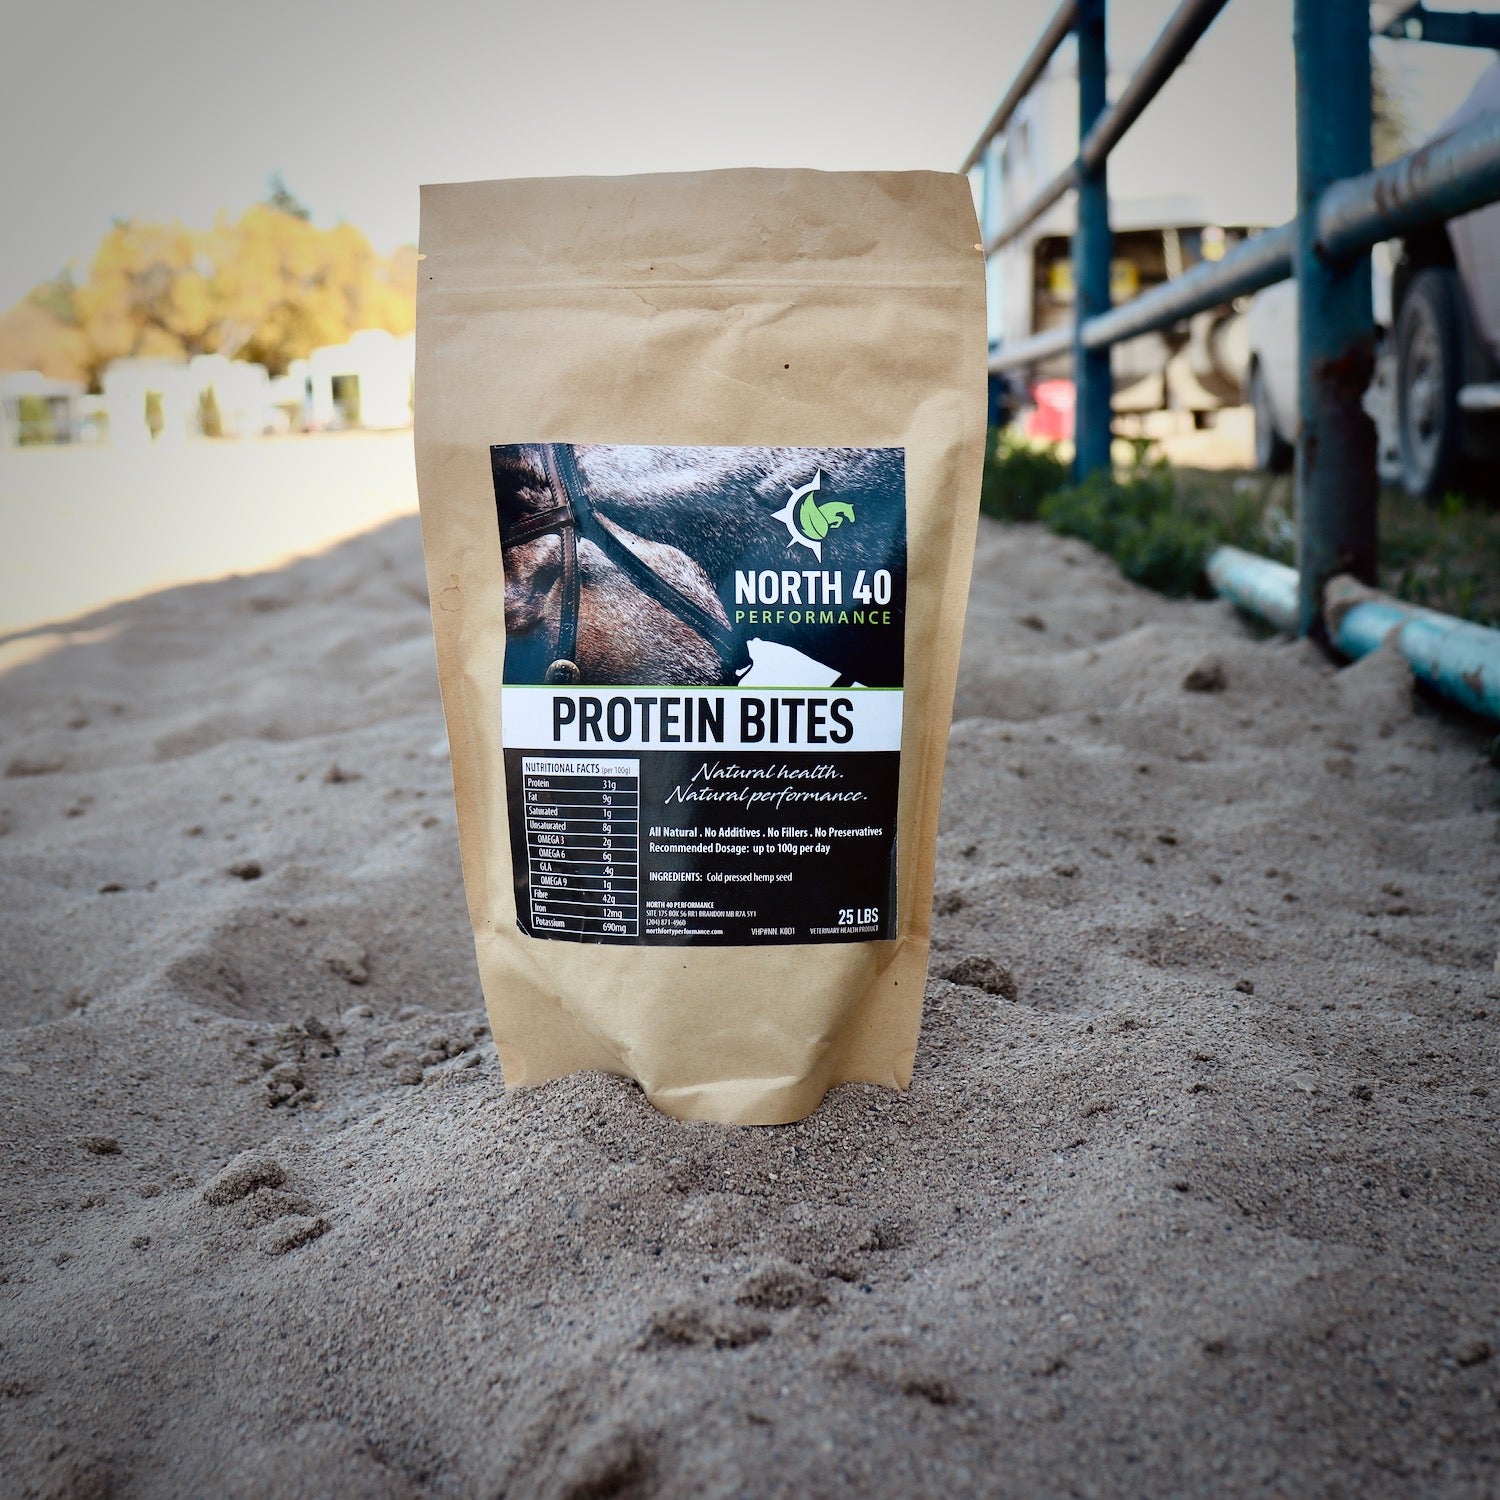 Grab a sample size bag of protein bites, a pelleted hemp feed